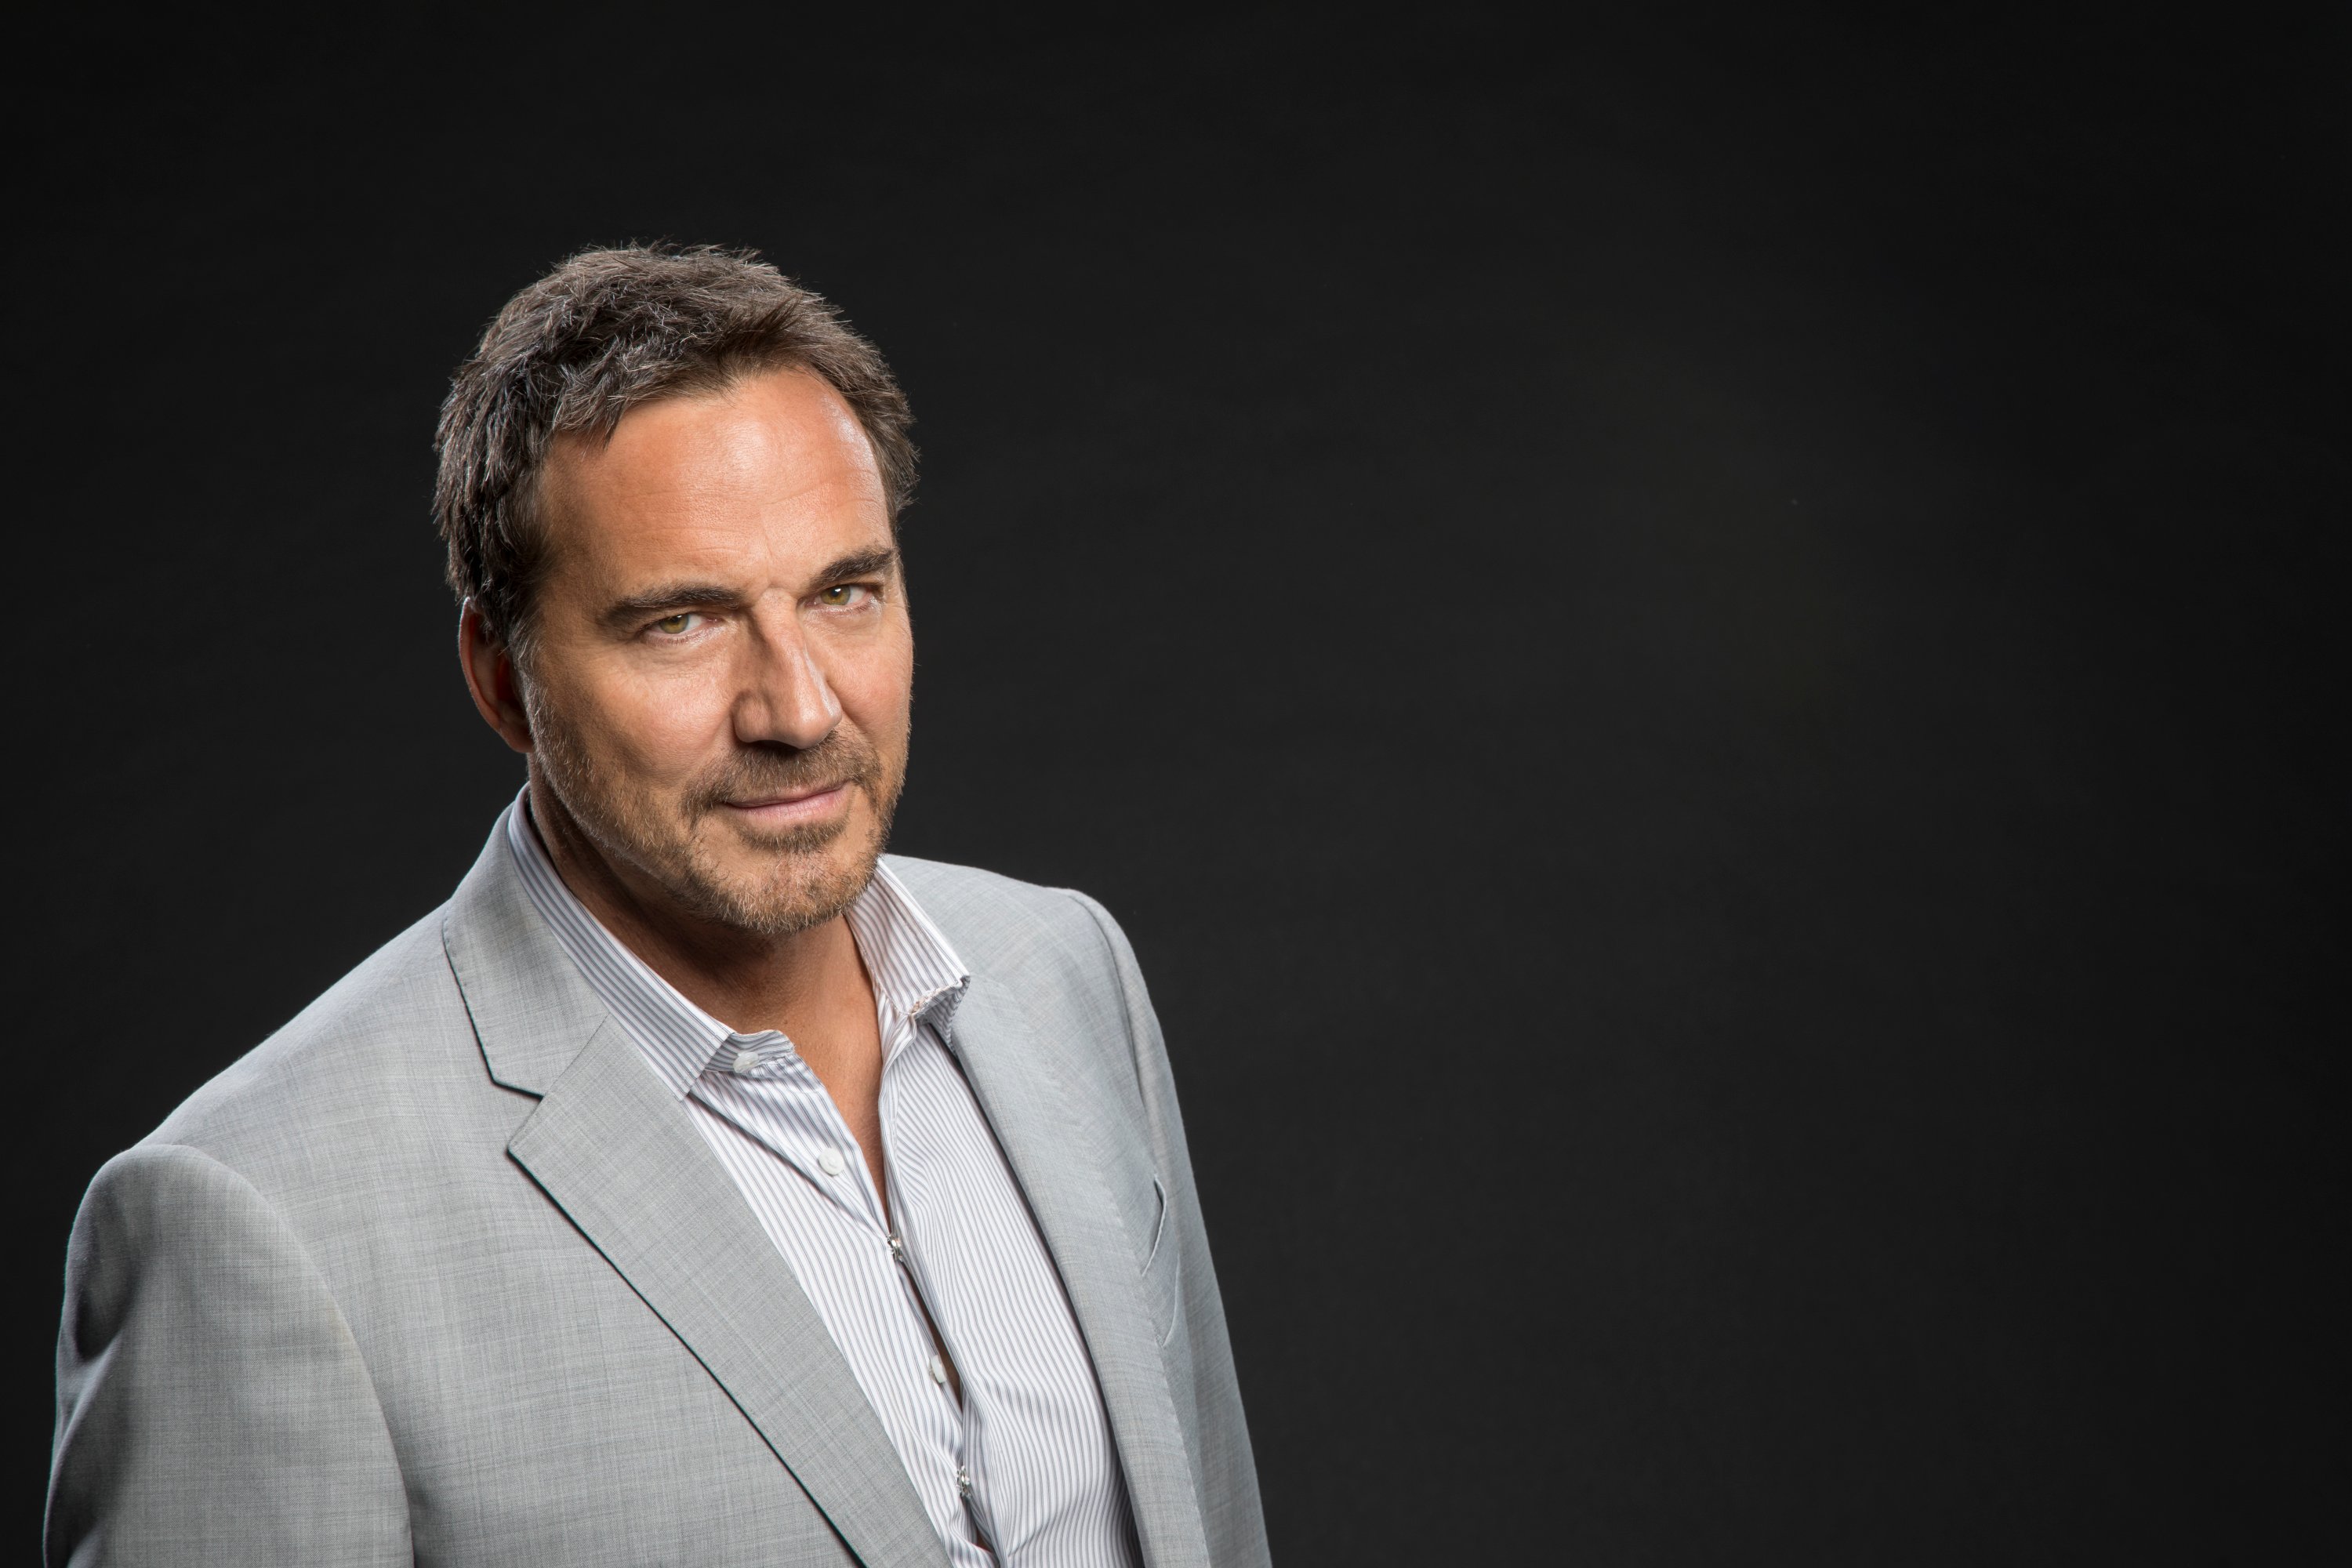 'The Bold and the Beautiful' actor Thorsten Kaye wearing a grey suit and white shirt; and standing in front of a black backdrop.